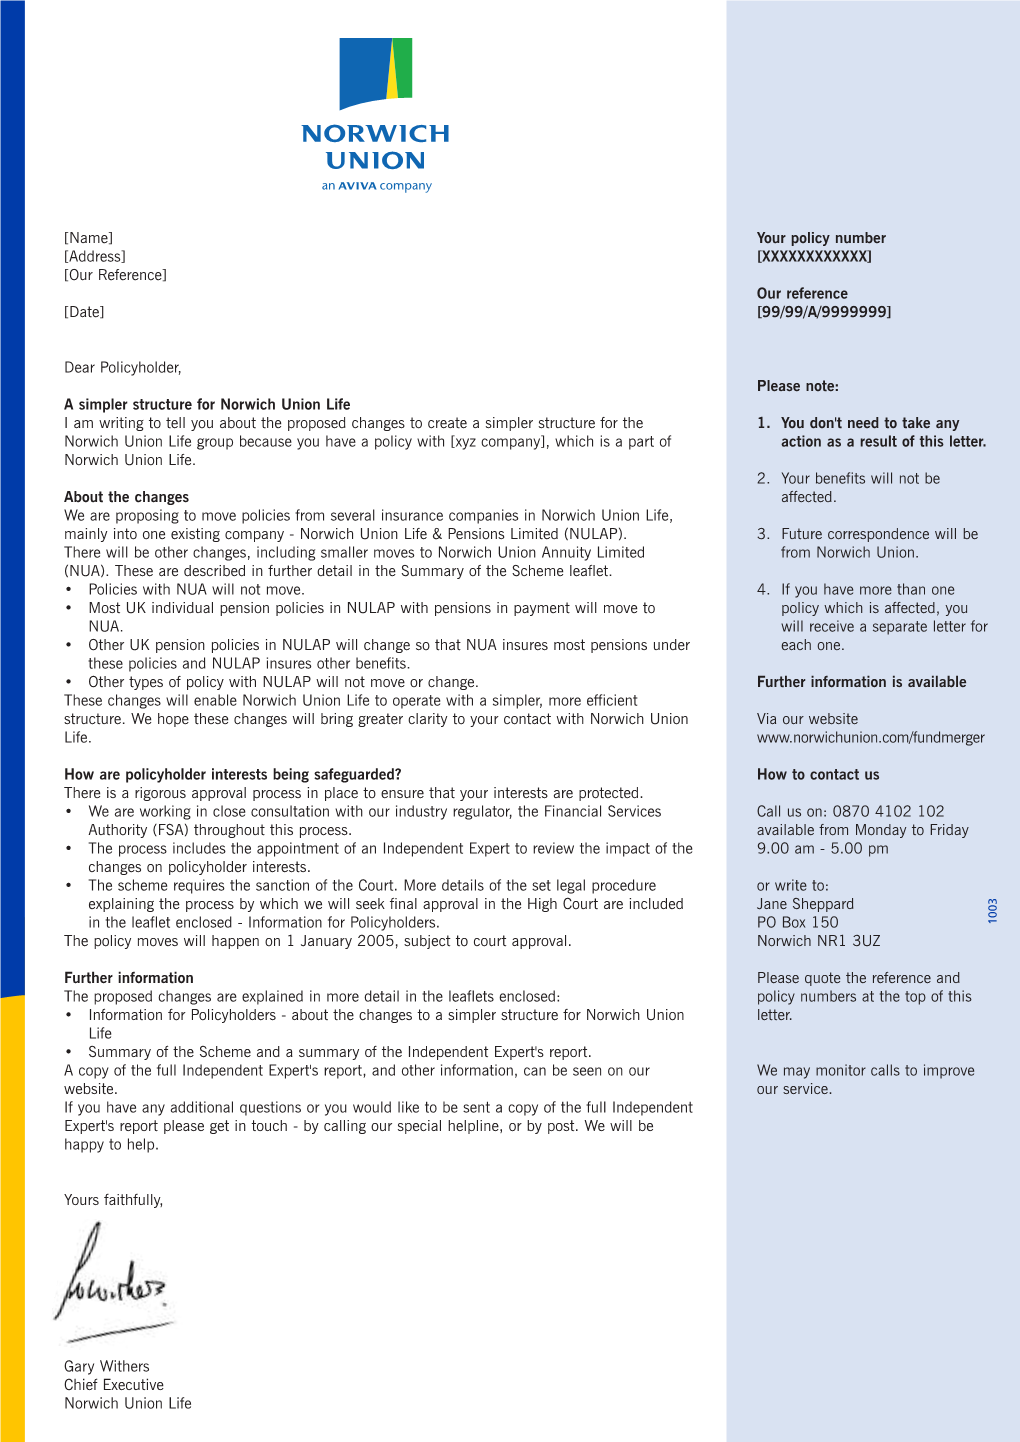 Simpler Structure to Norwich Union Life Letter Example 2004